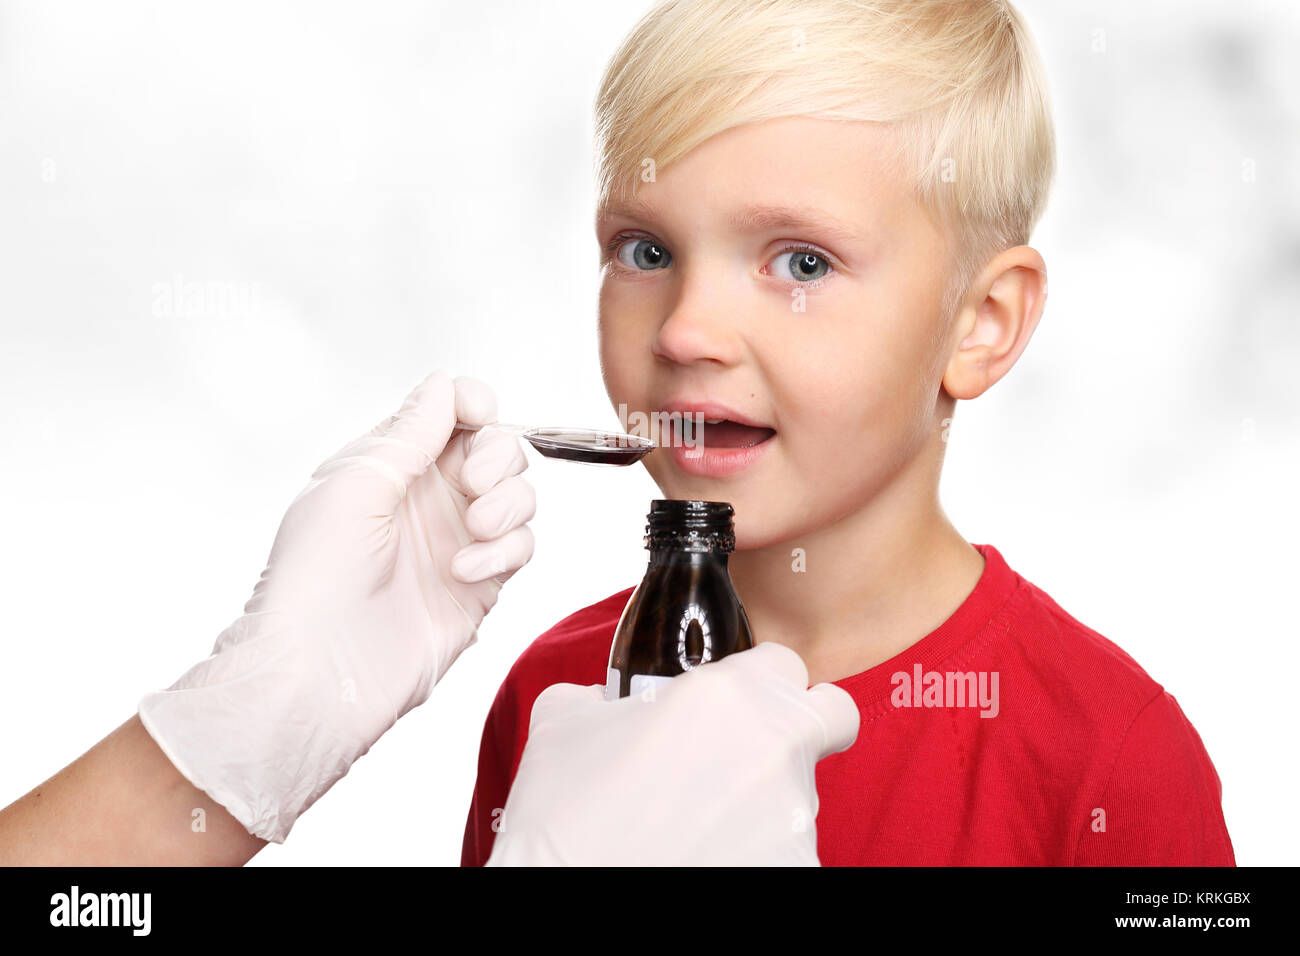 the child takes the medicine served on a spoon. Stock Photo